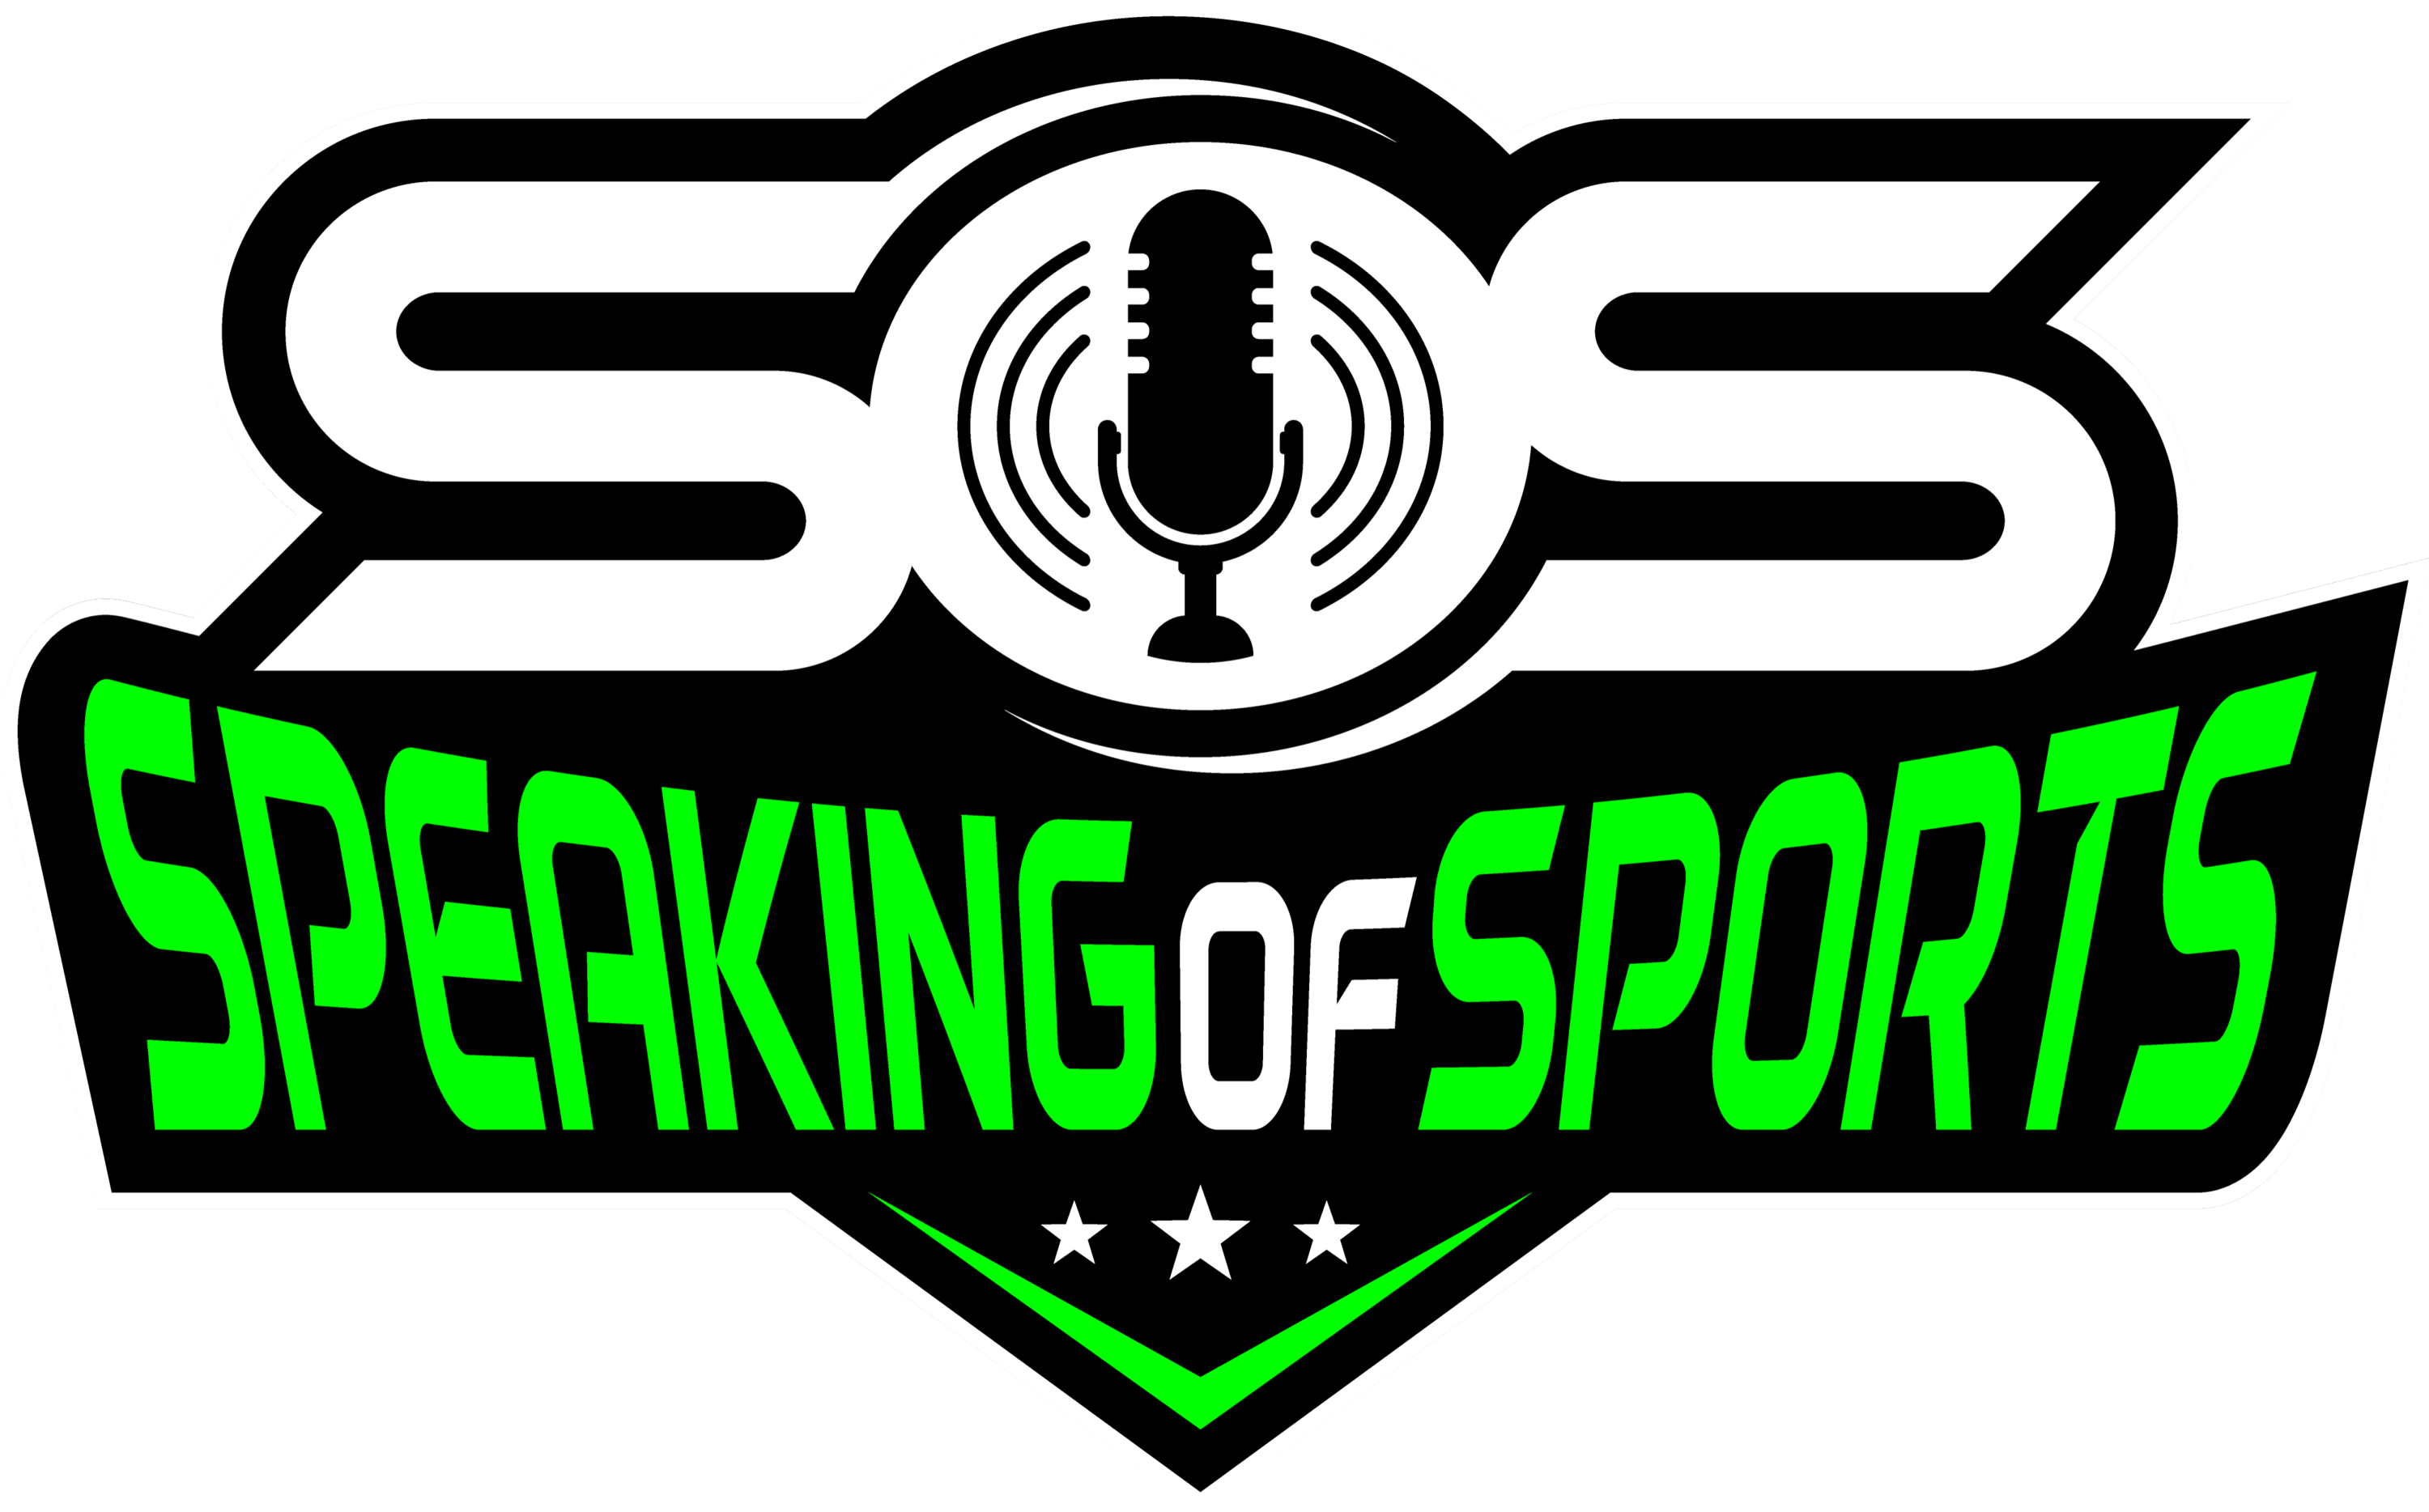 Speaking of Sports Podcast